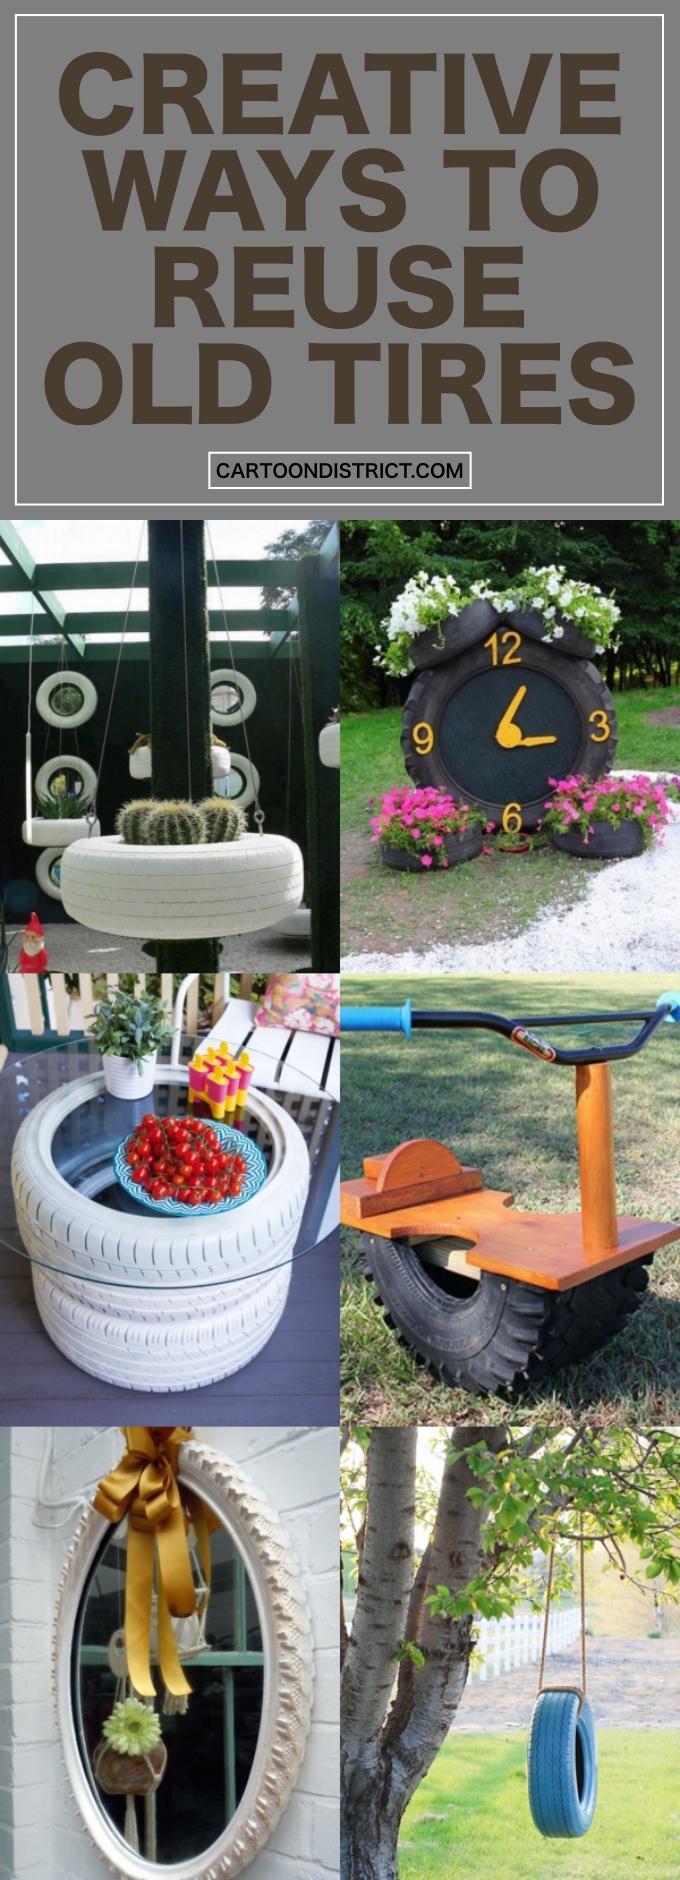 CREATIVE WAYS TO RESUSE OLD TIRES